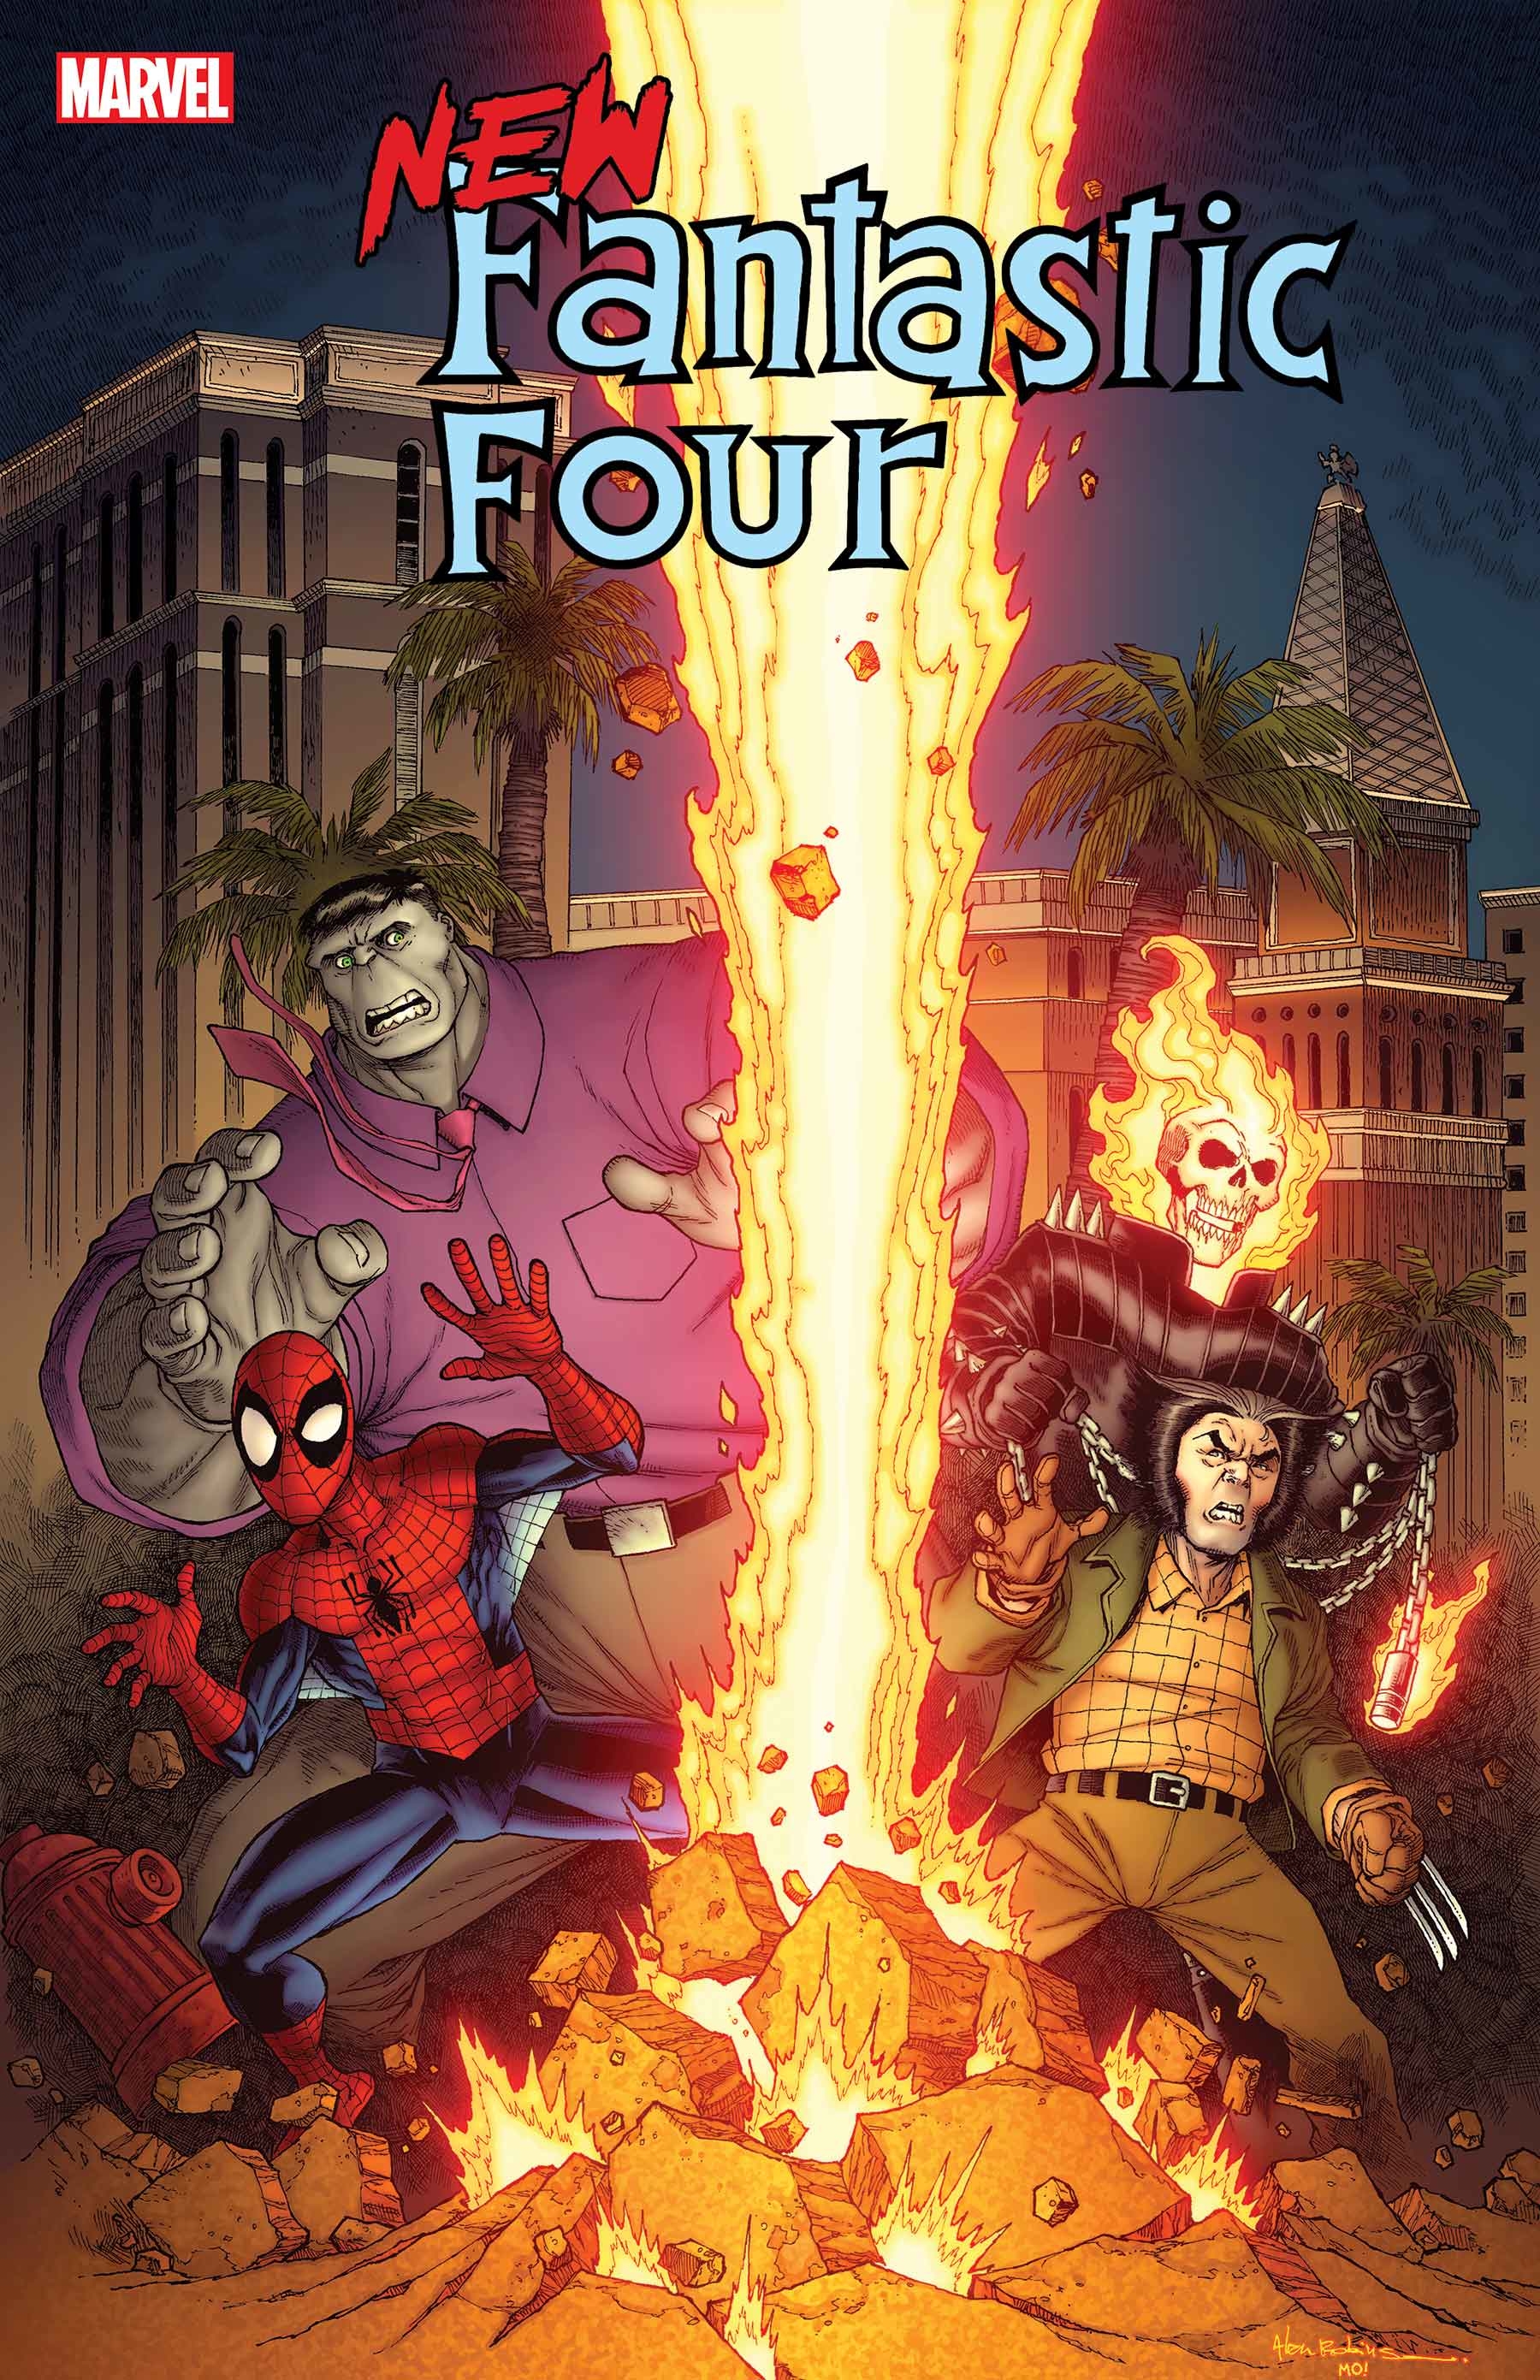 New Fantastic Four #4 (Of 5)